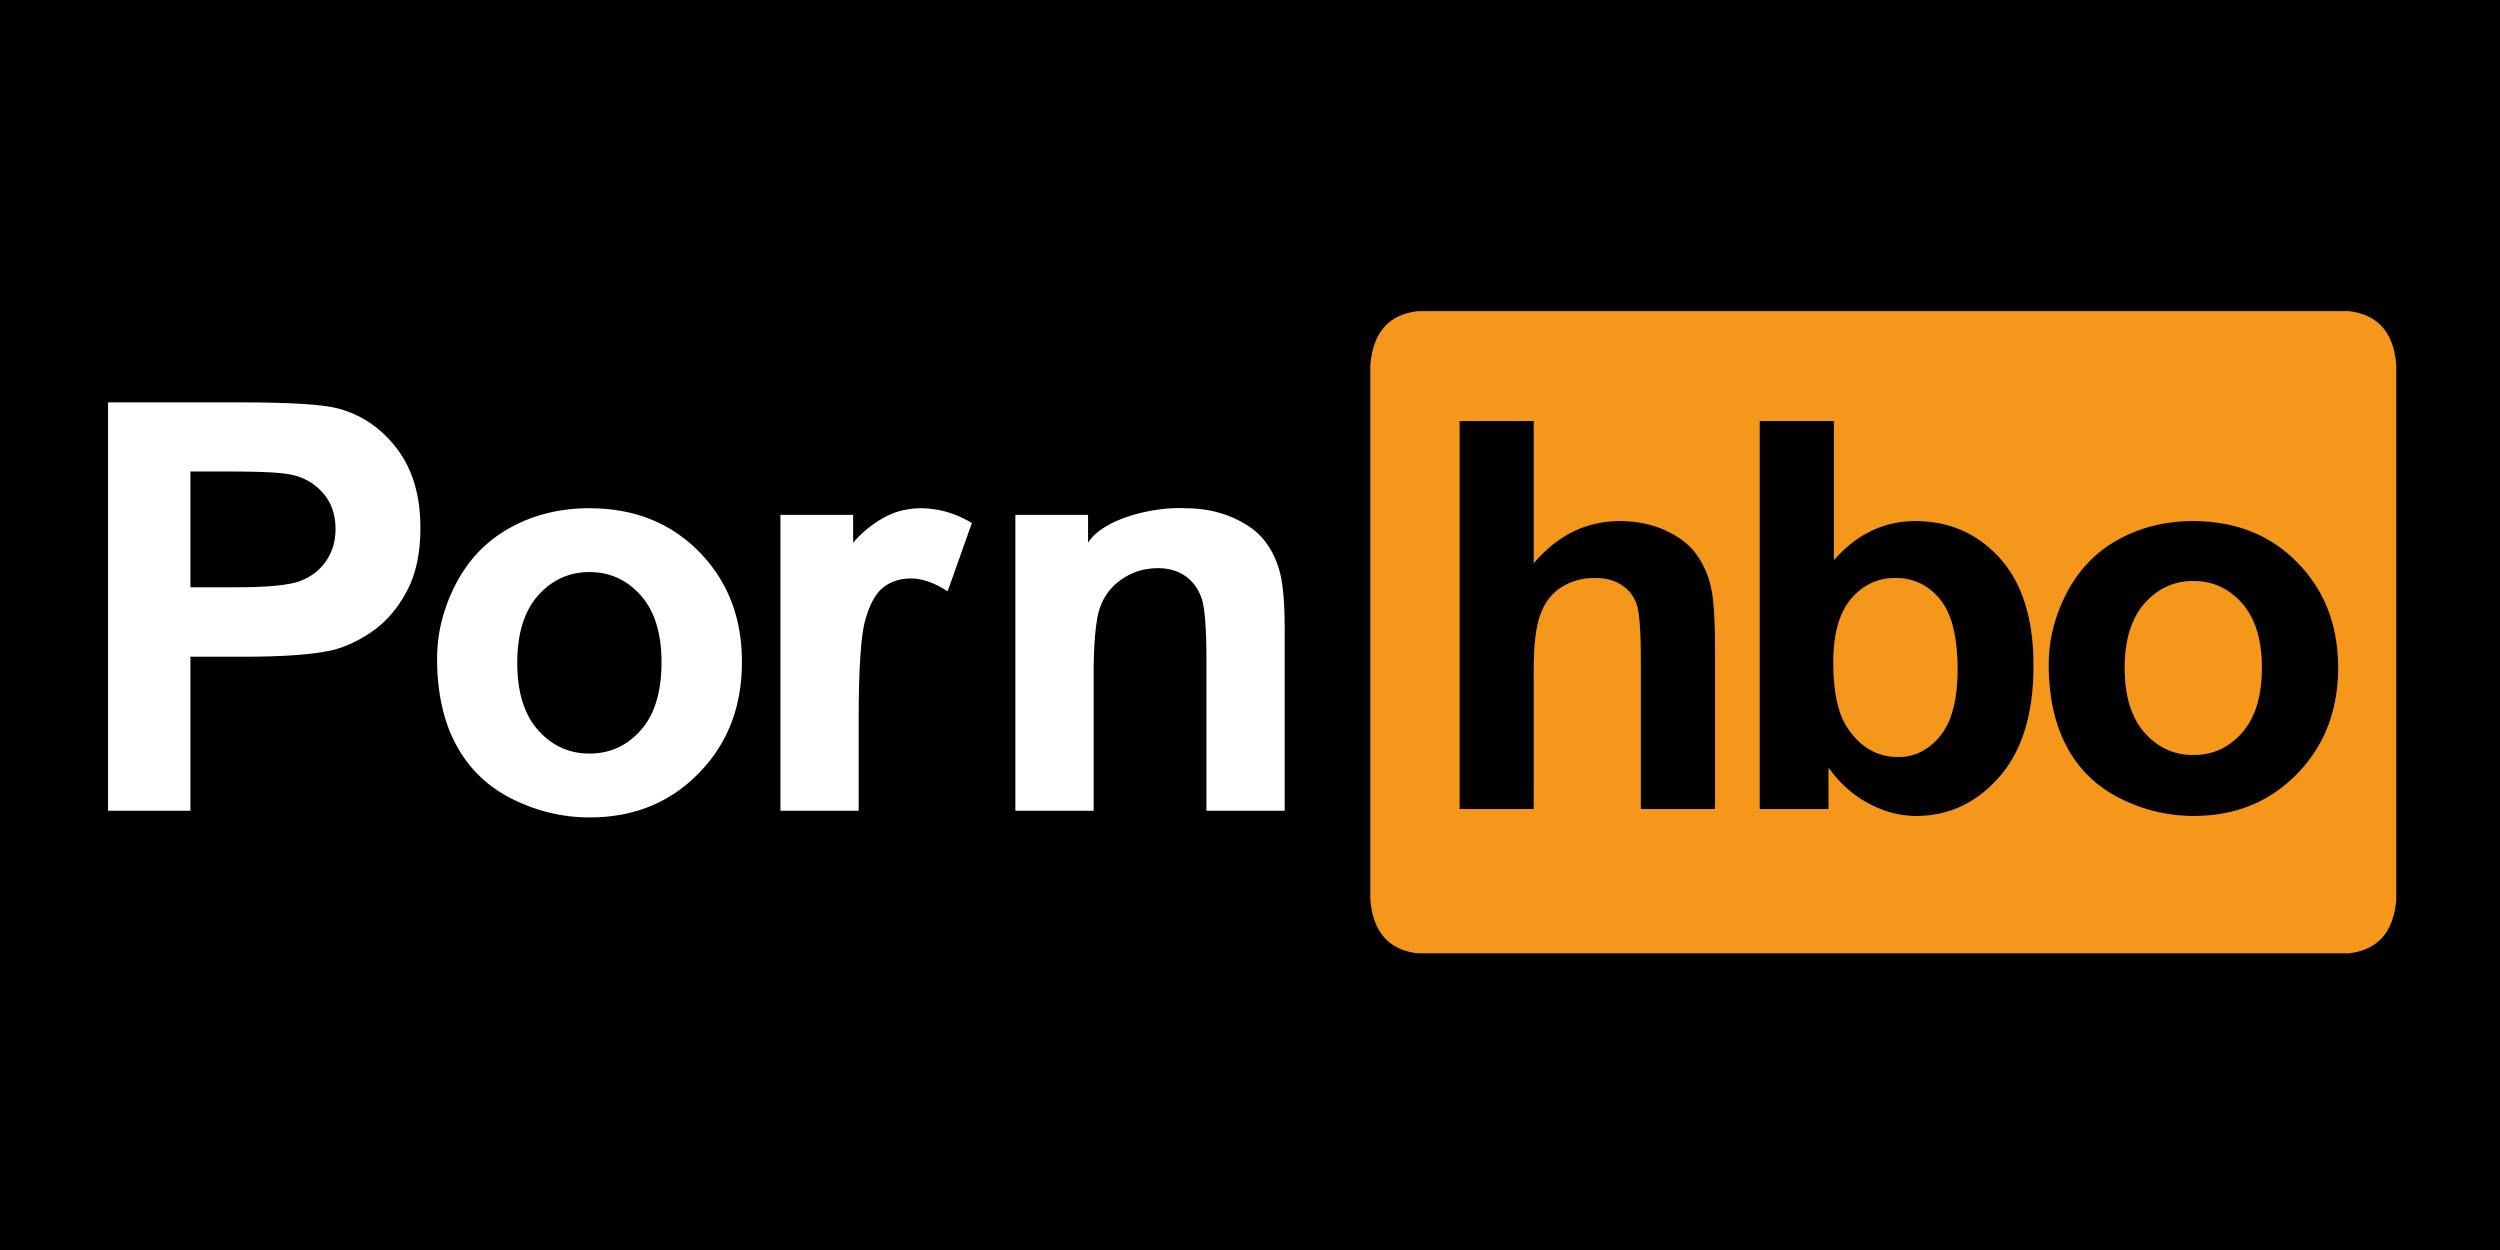 Pornhub makes a play for HBO’s iconic sex programming